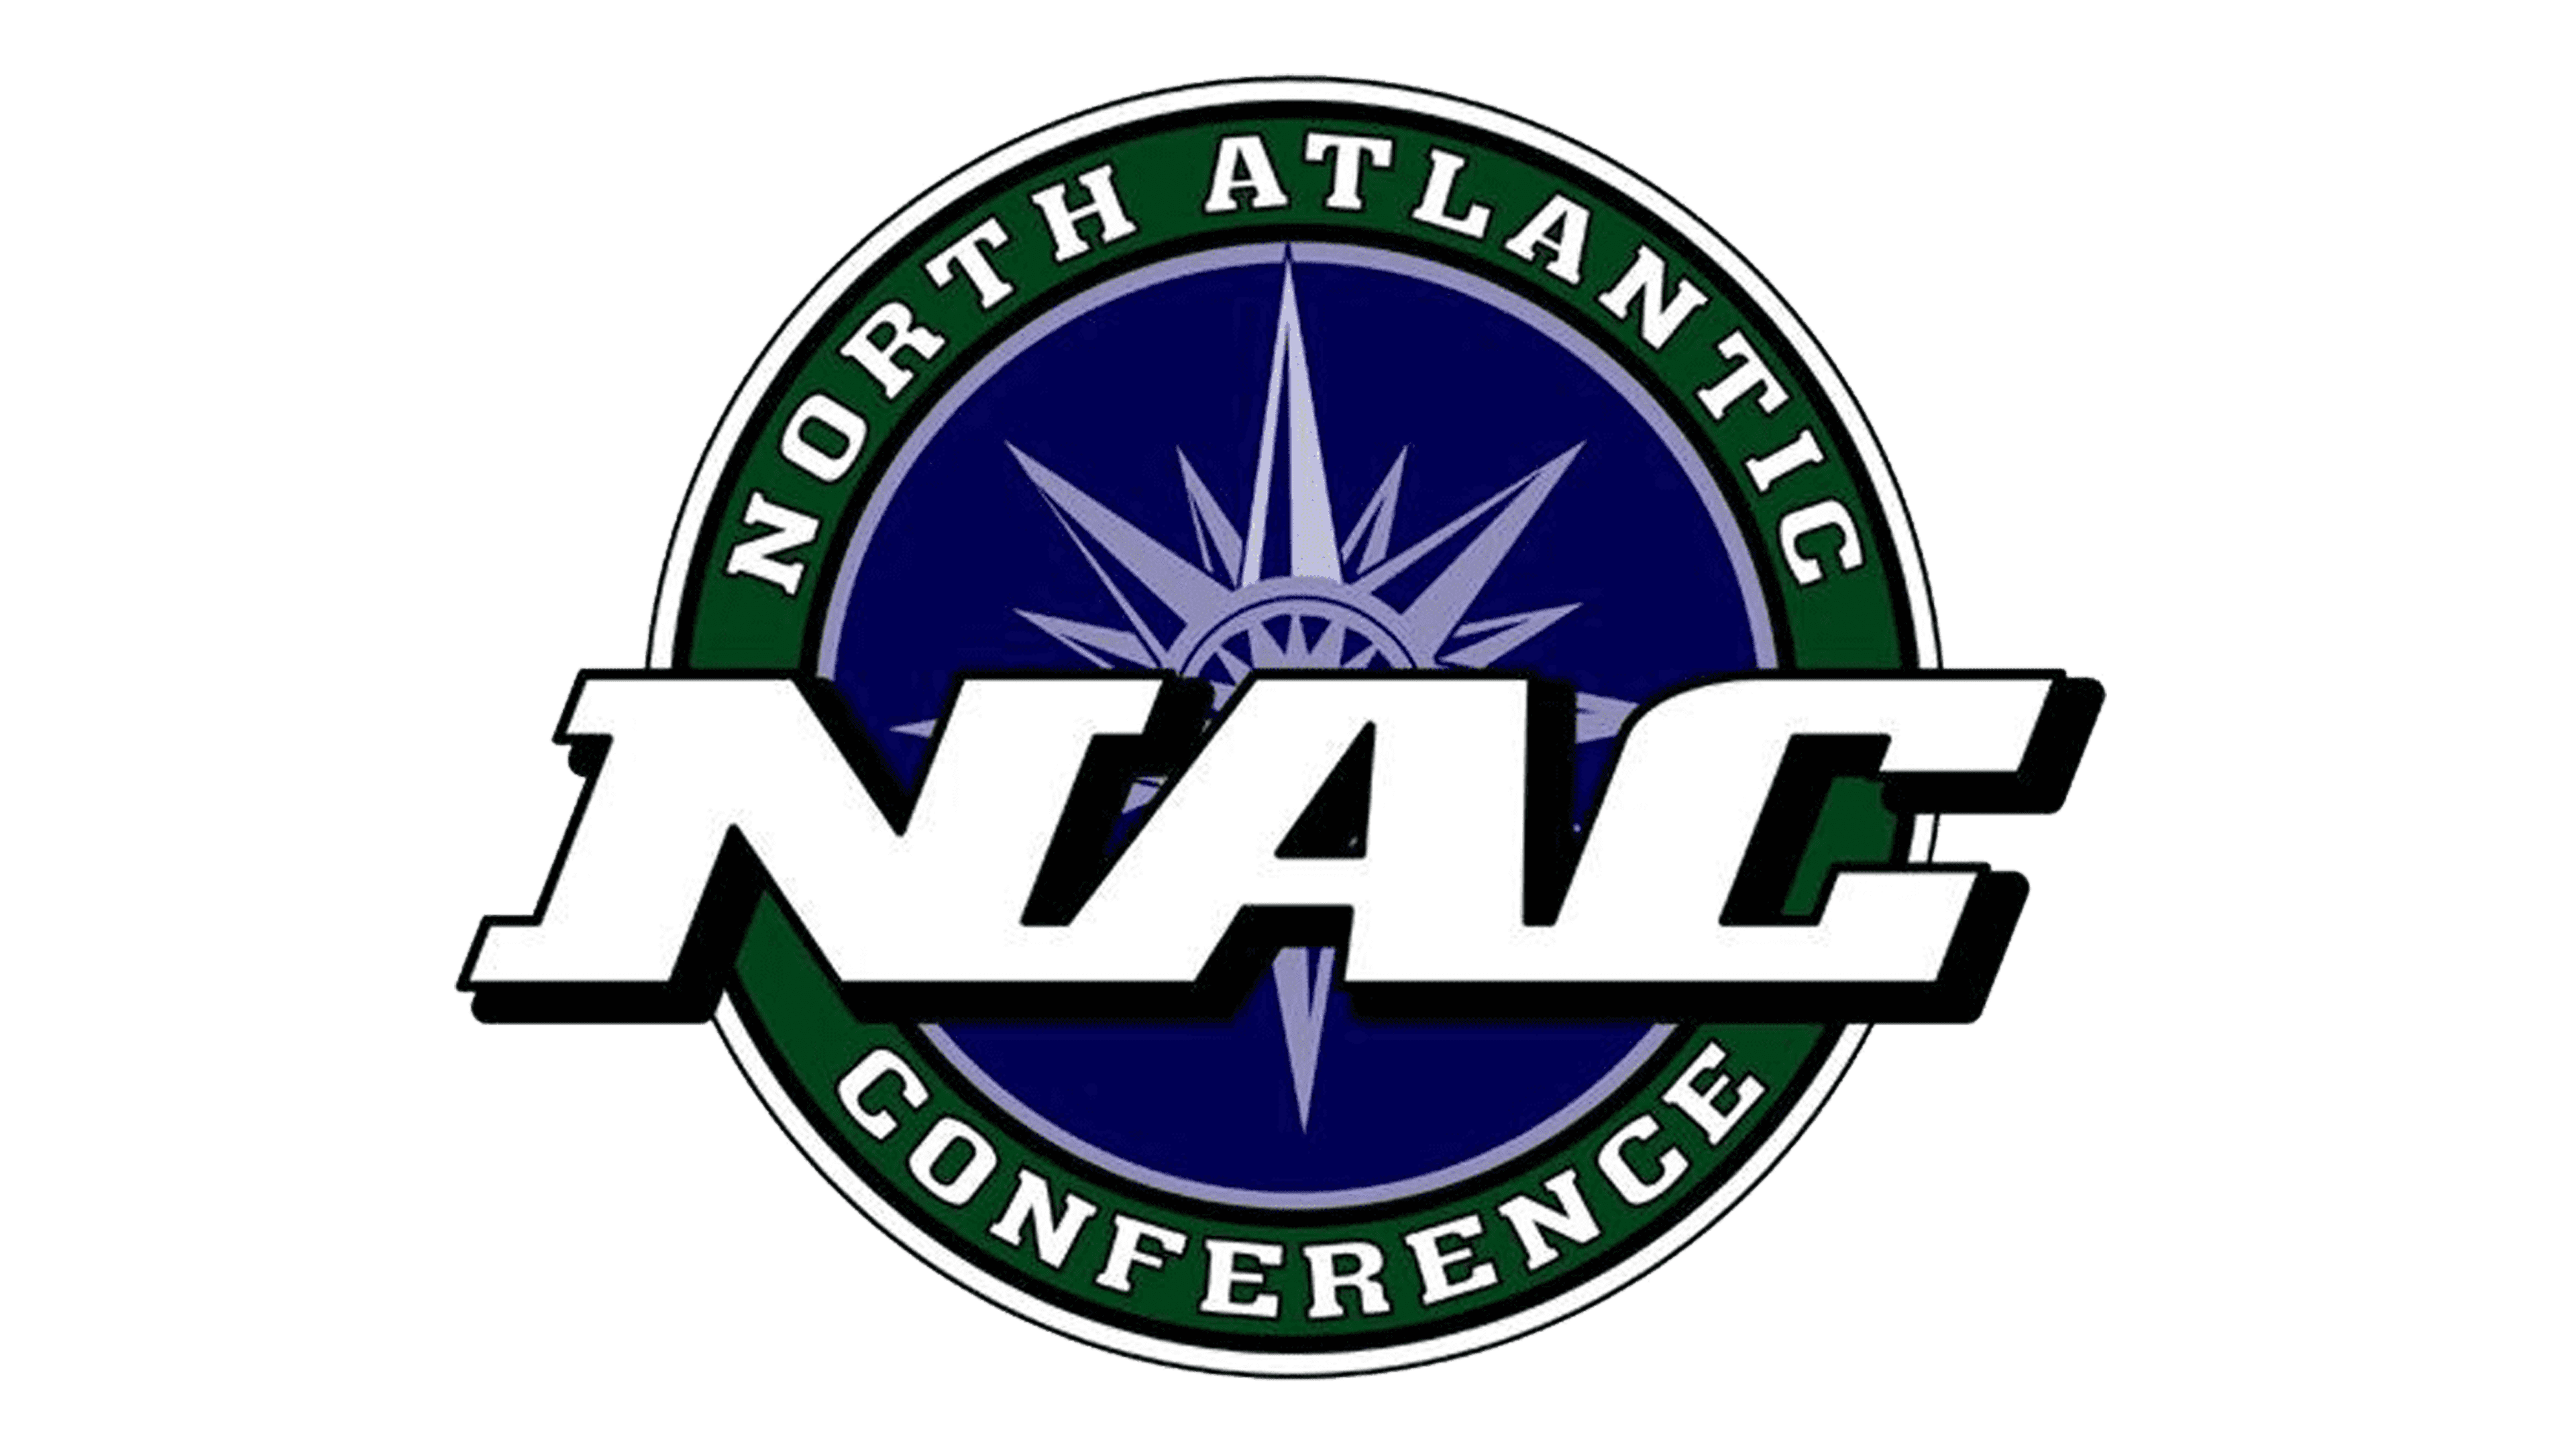 North Atlantic Conference Logo and symbol, meaning, history, PNG, brand